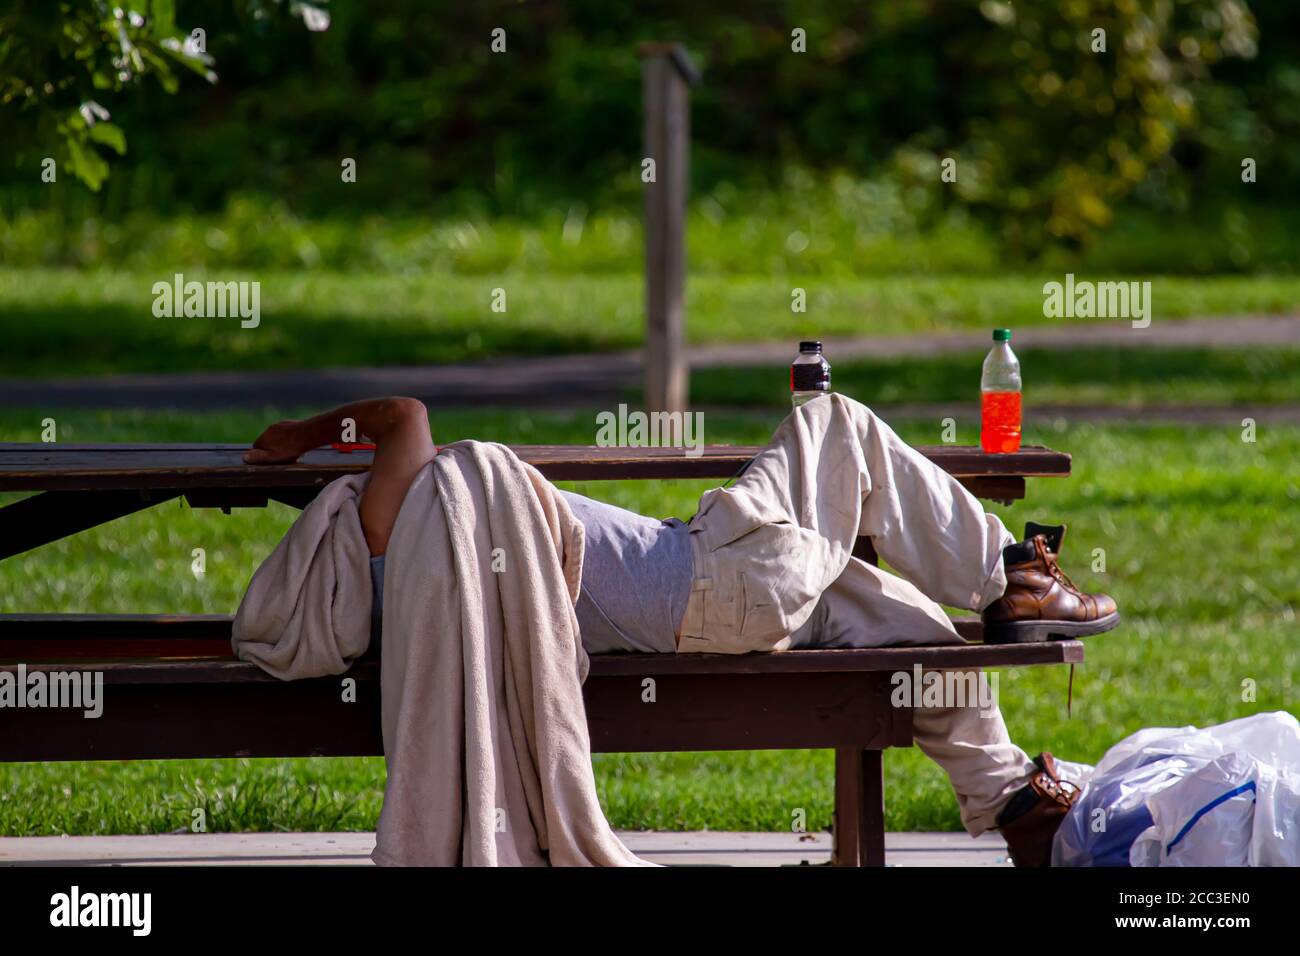 A homeless caucasian man is sleeping on a picnic table in a shaded area of a park. He is covering his head with a dirty blanket. His belongings are in Stock Photo